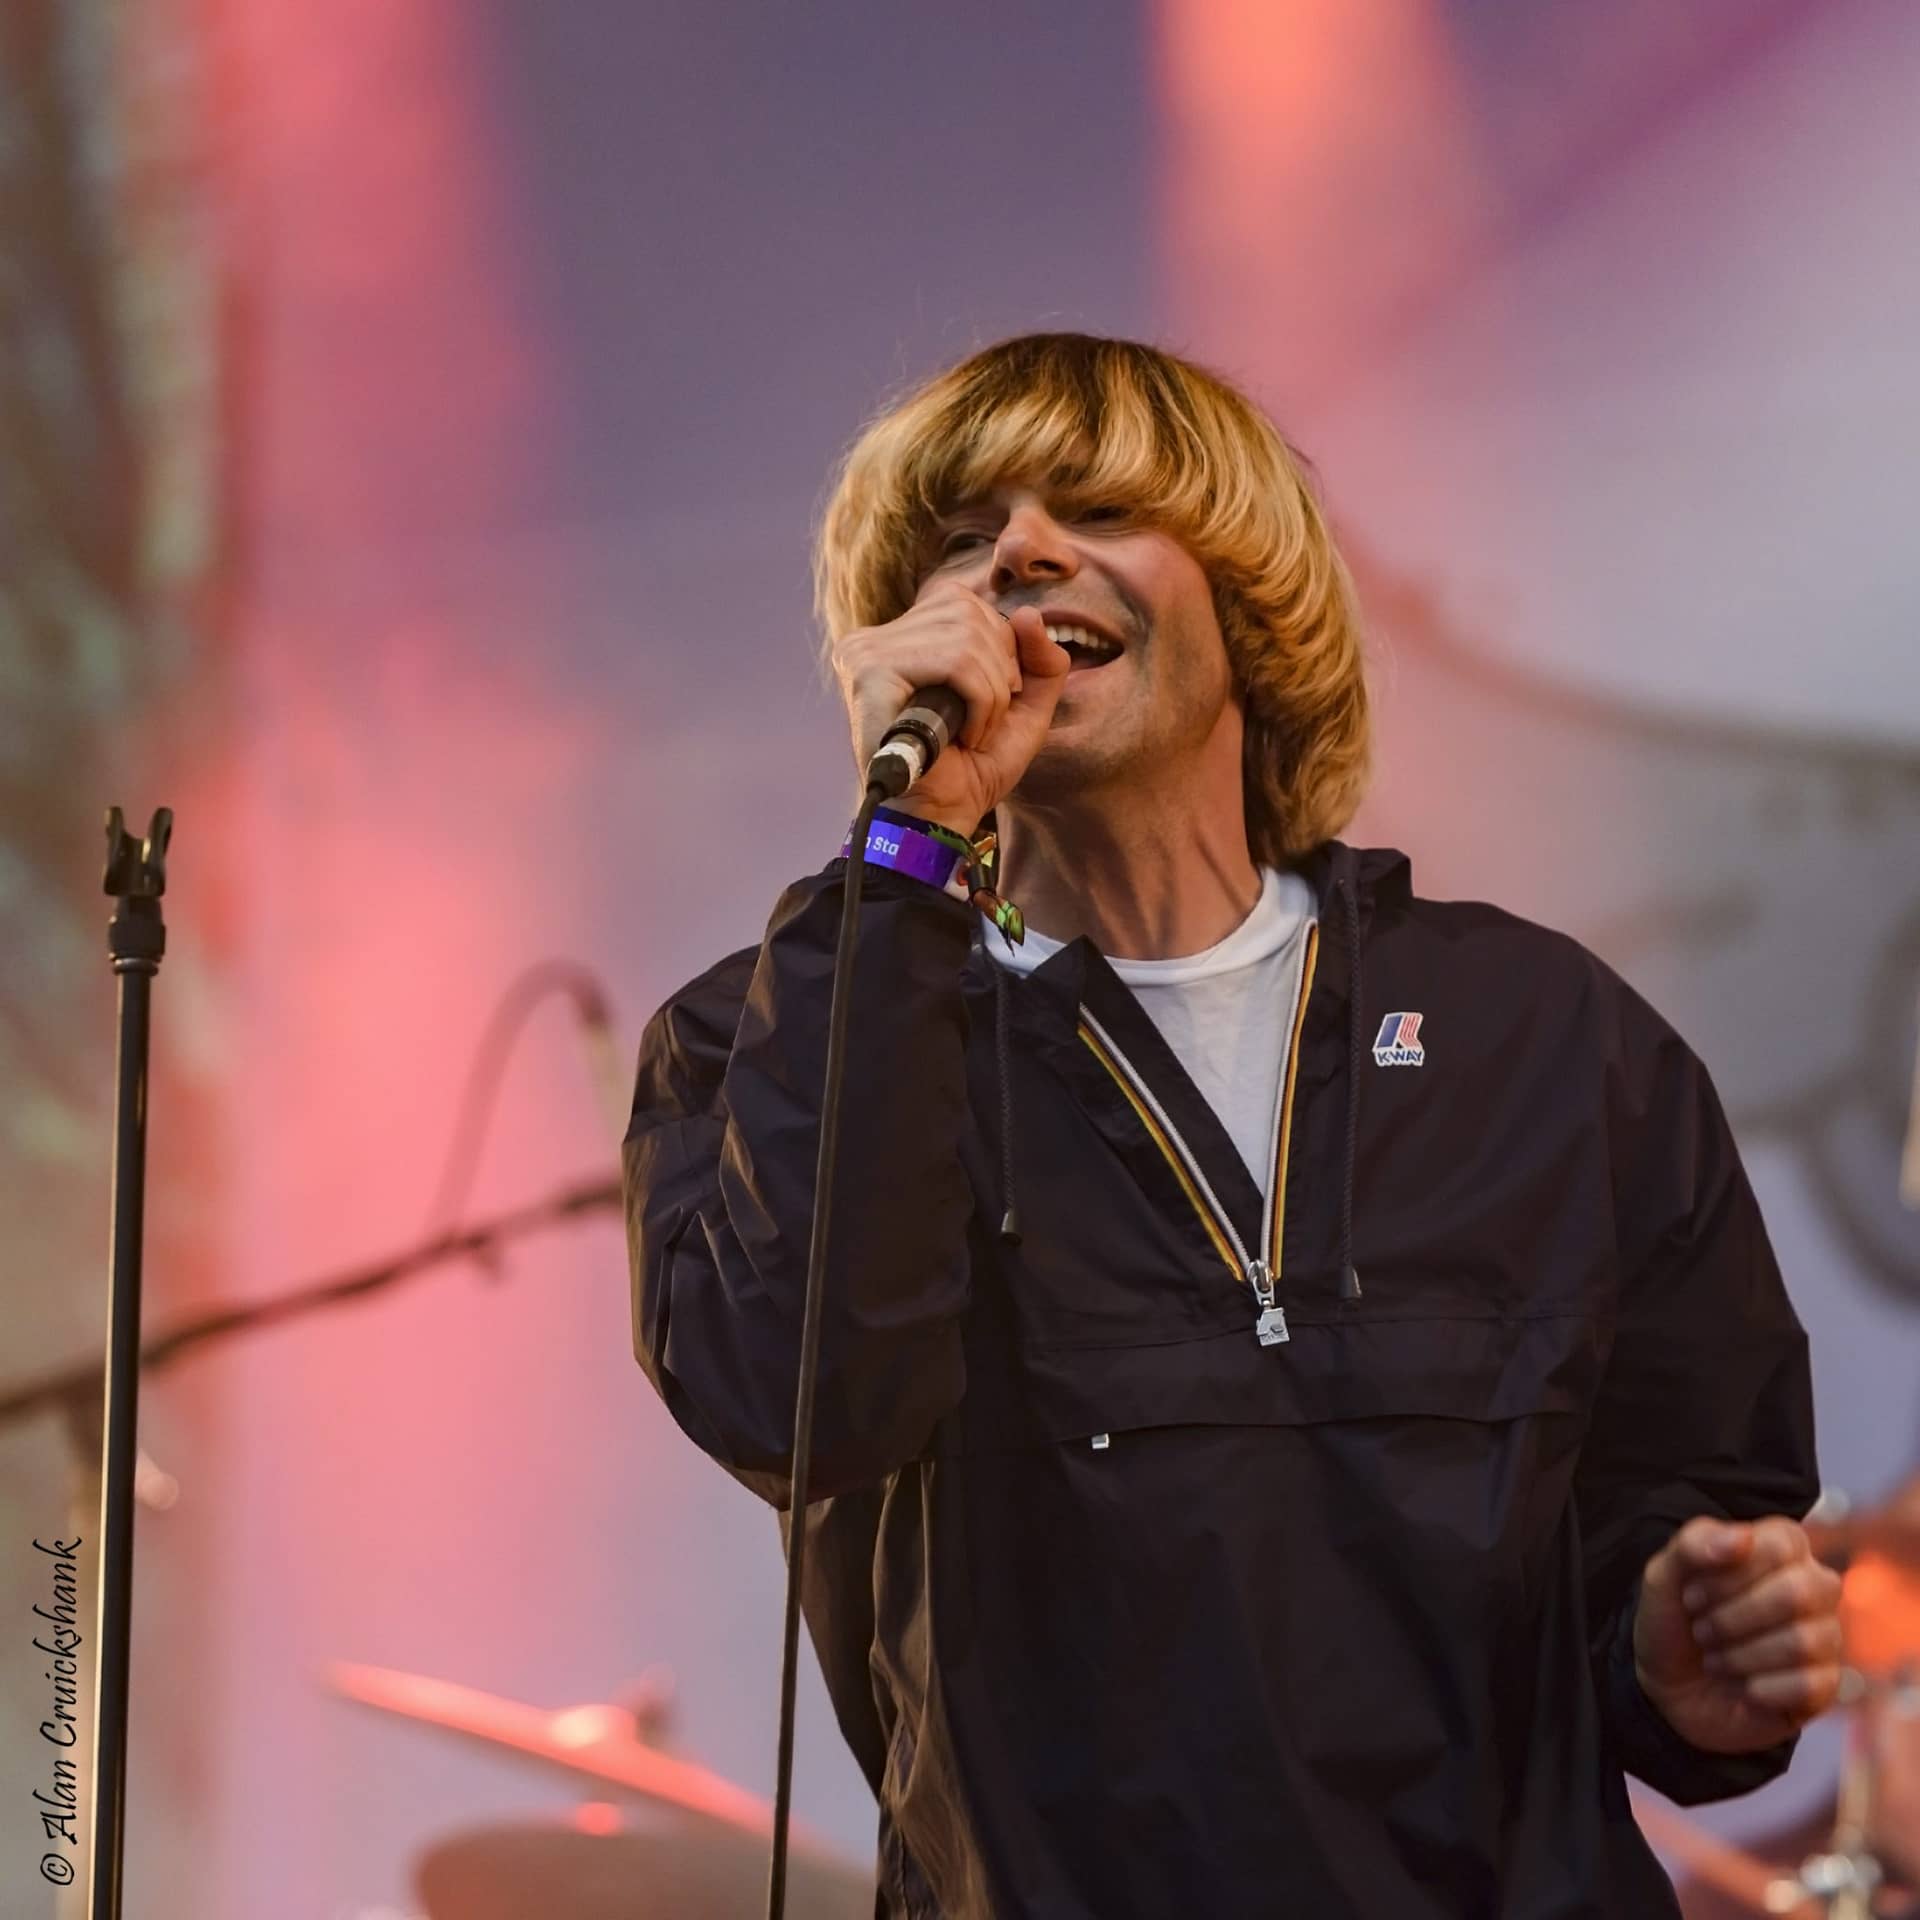 hnhG8 - The Charlatans, Friday Belladrum 2018 - IMAGES